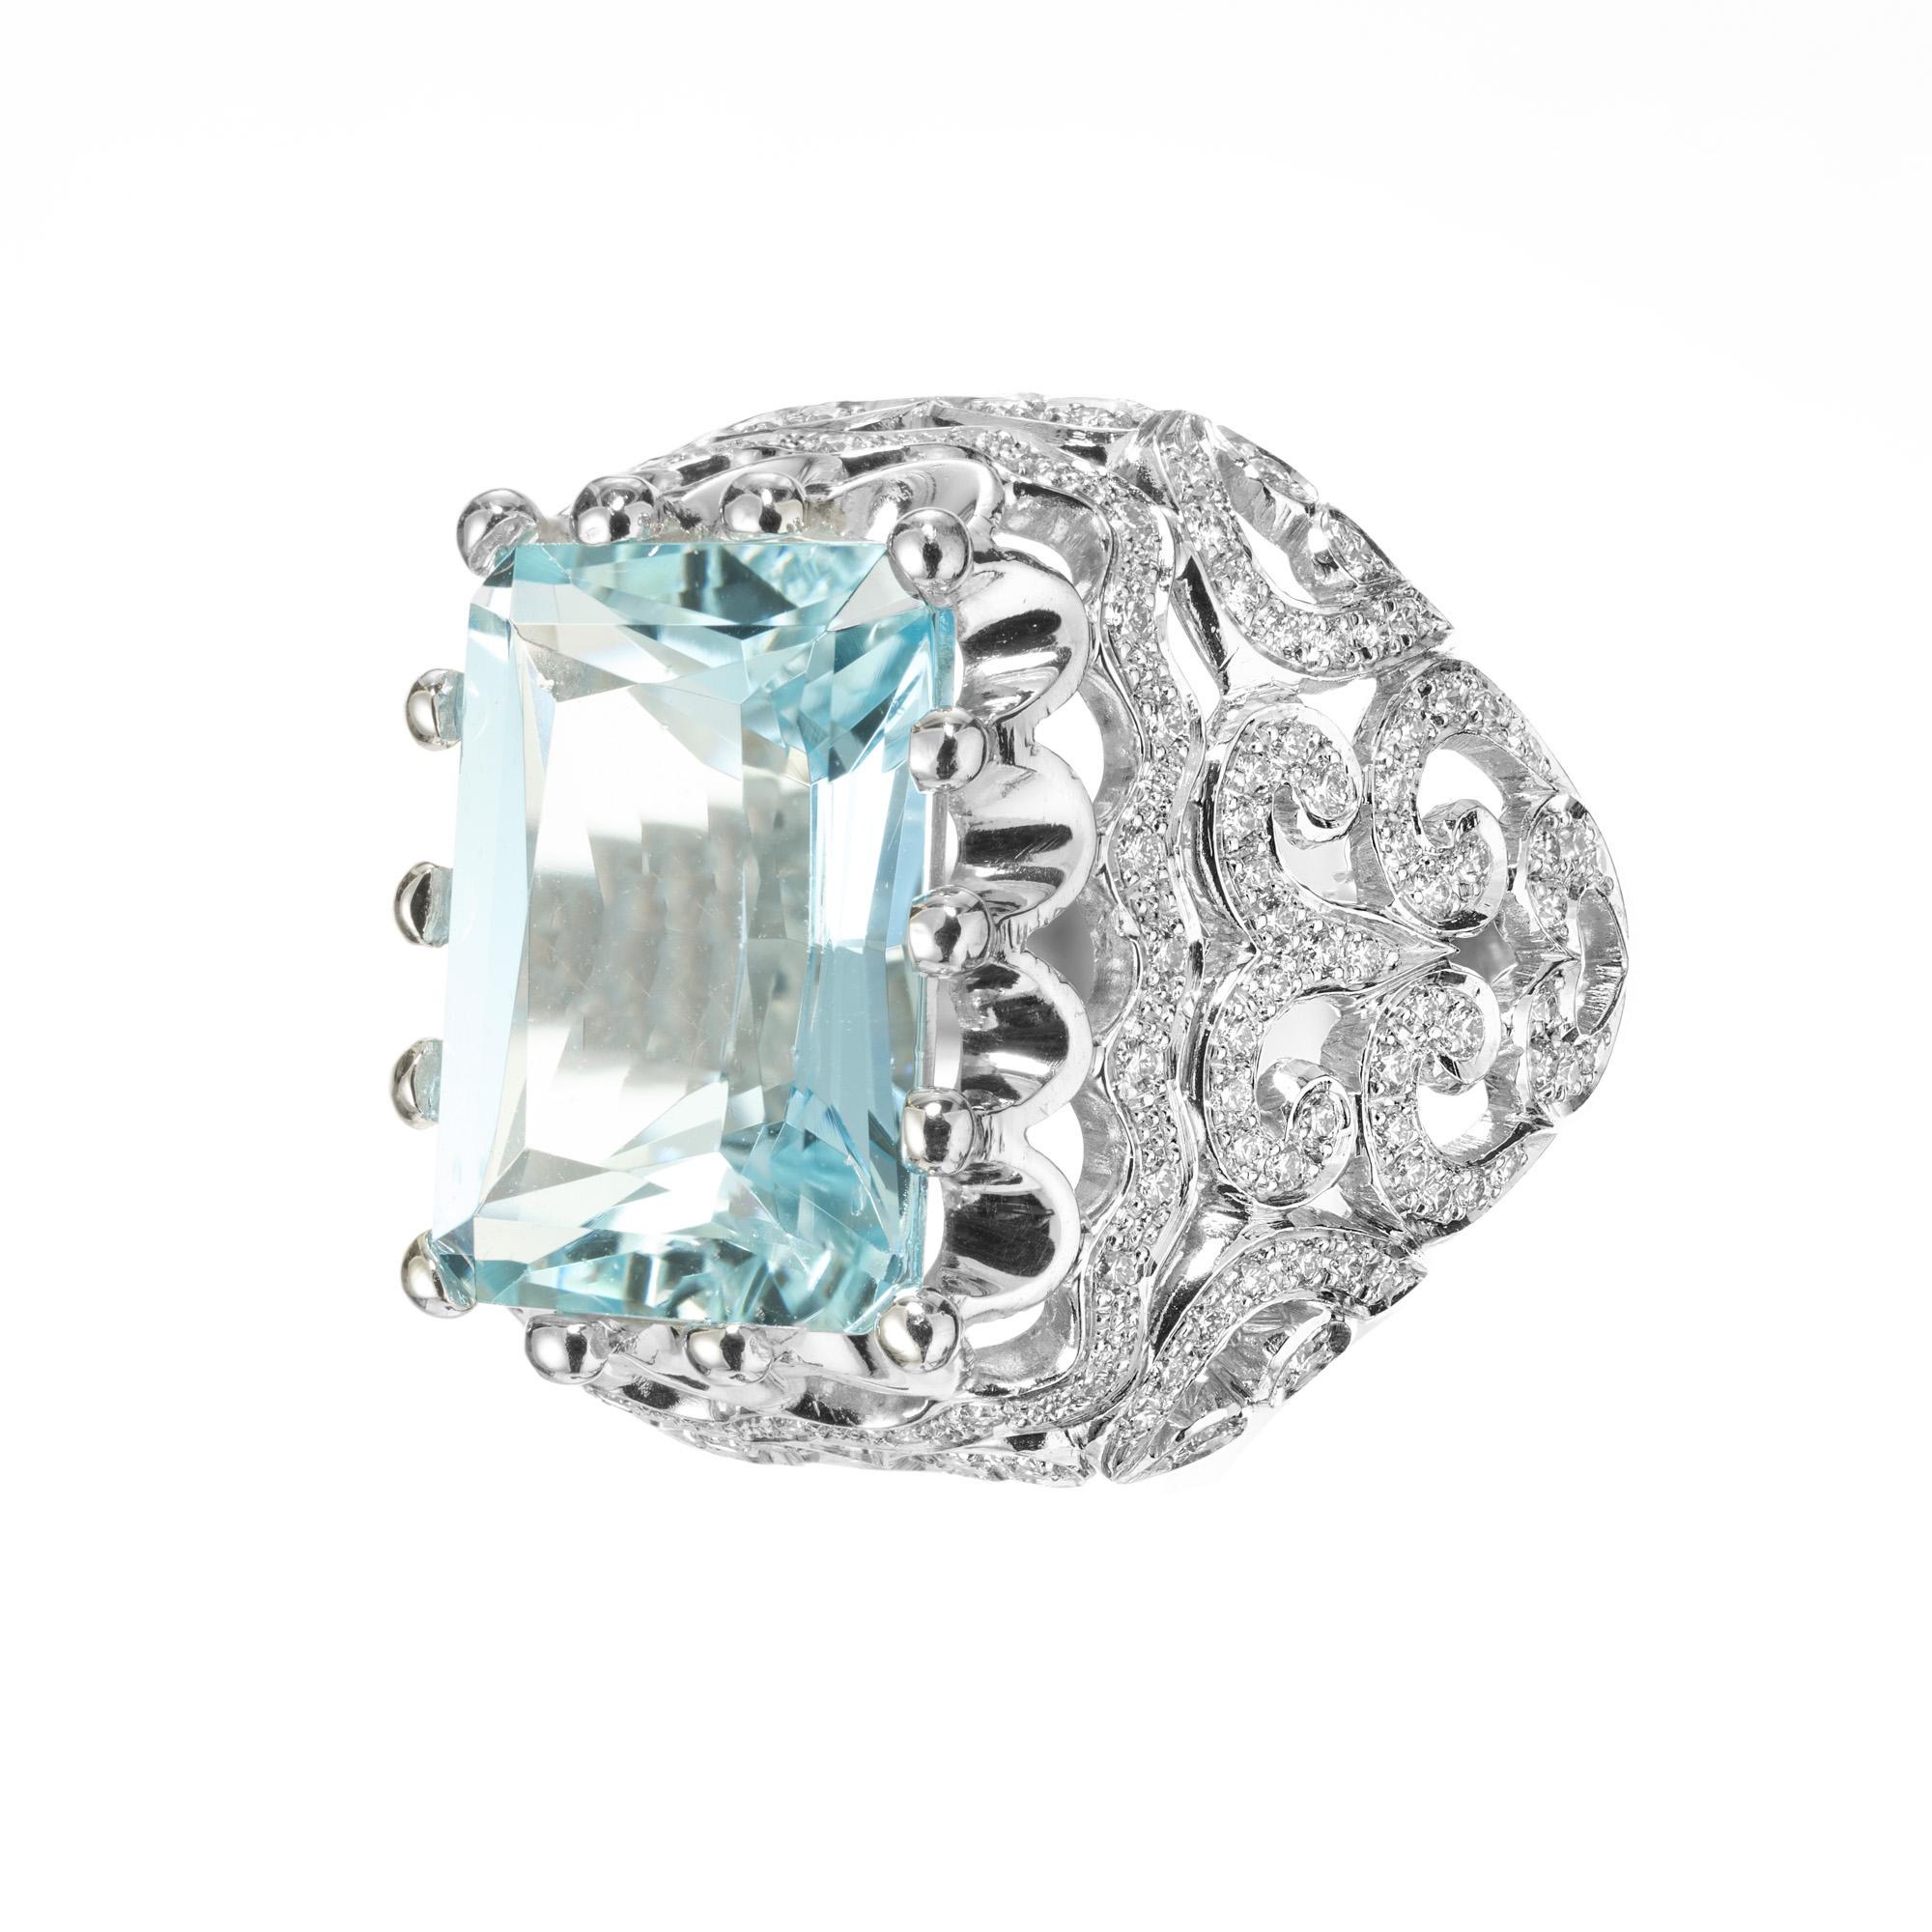 Aqua and diamond ring. Beautiful bright prodigious 6.64 carat emerald cut center Aquamarine mounted in a platinum open work artisan cocktail setting, accented with 150 round cut pave set diamonds. By New York designer Featherstone.

1 rectangular